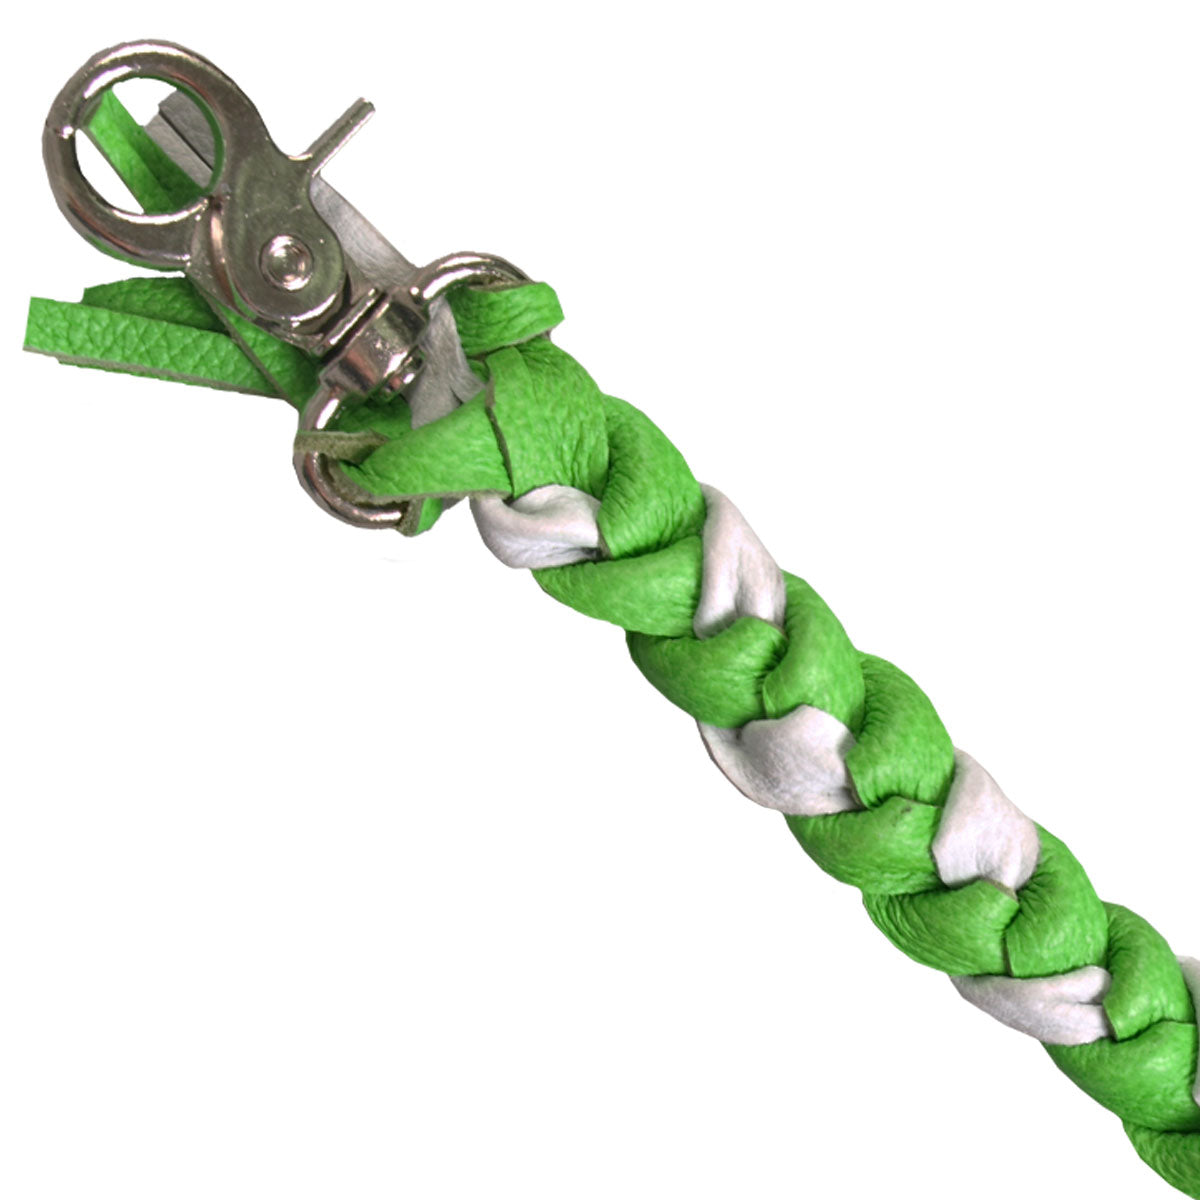 Hot Leathers 9" White and Green Braided Leather Keychain